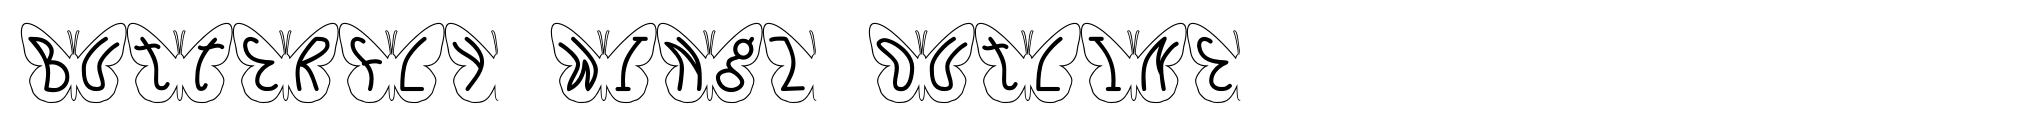 Butterfly Wingz Outline image